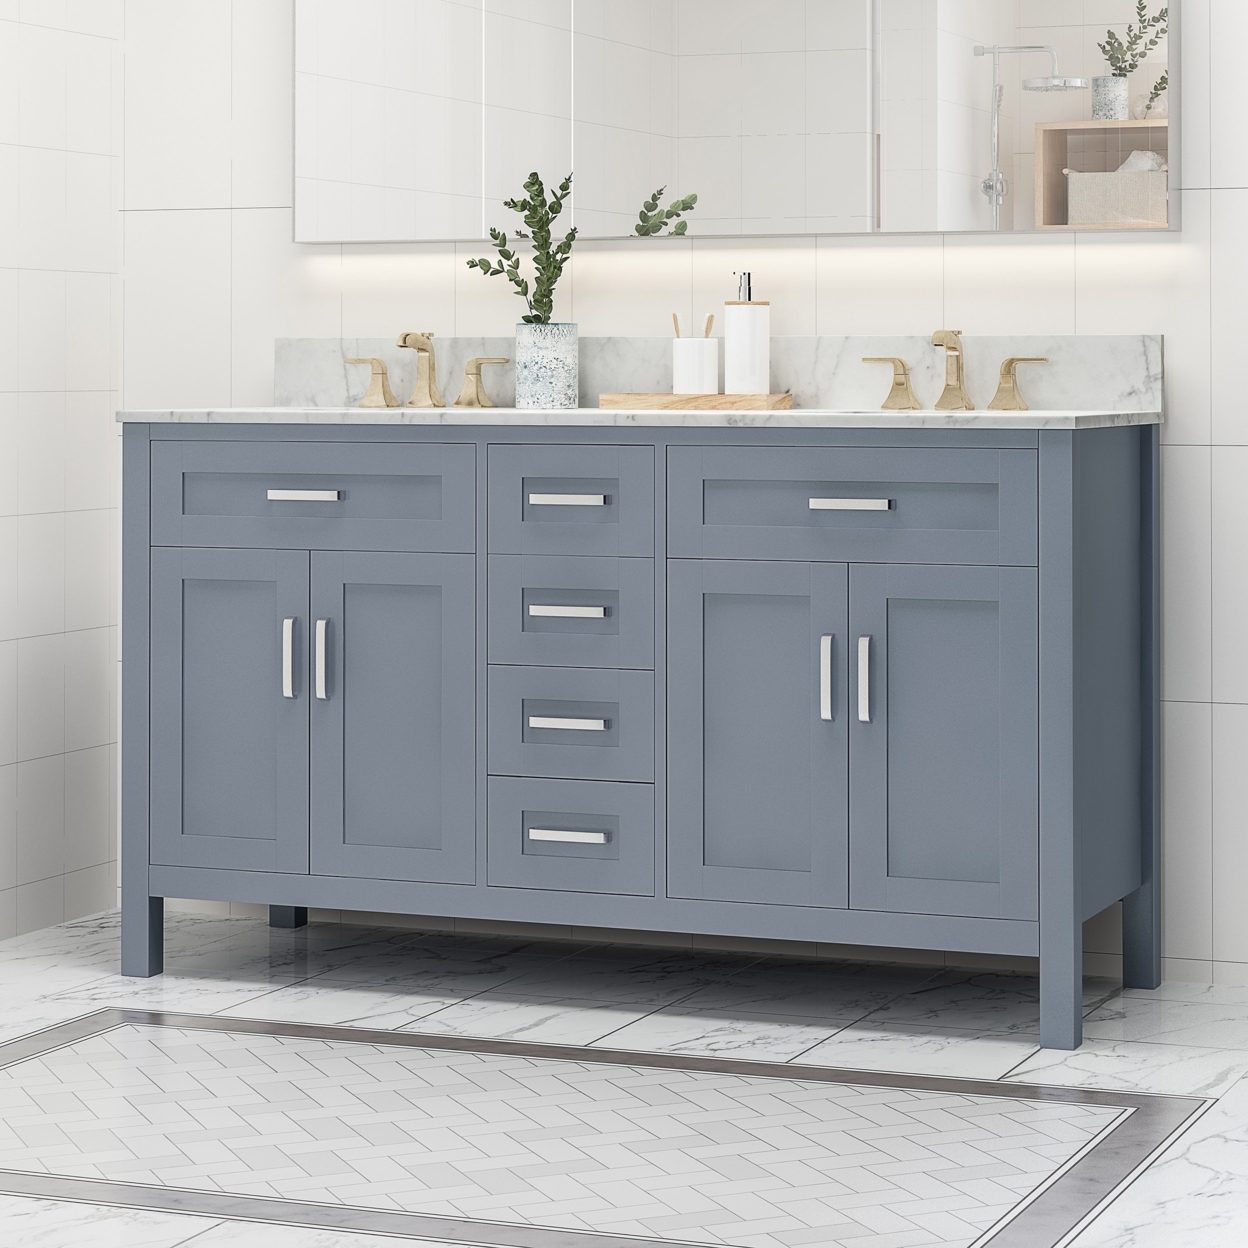 Greeley Contemporary 60 Wood Double Sink Bathroom Vanity With Marble Counter Top With Carrara White Marble - Gray